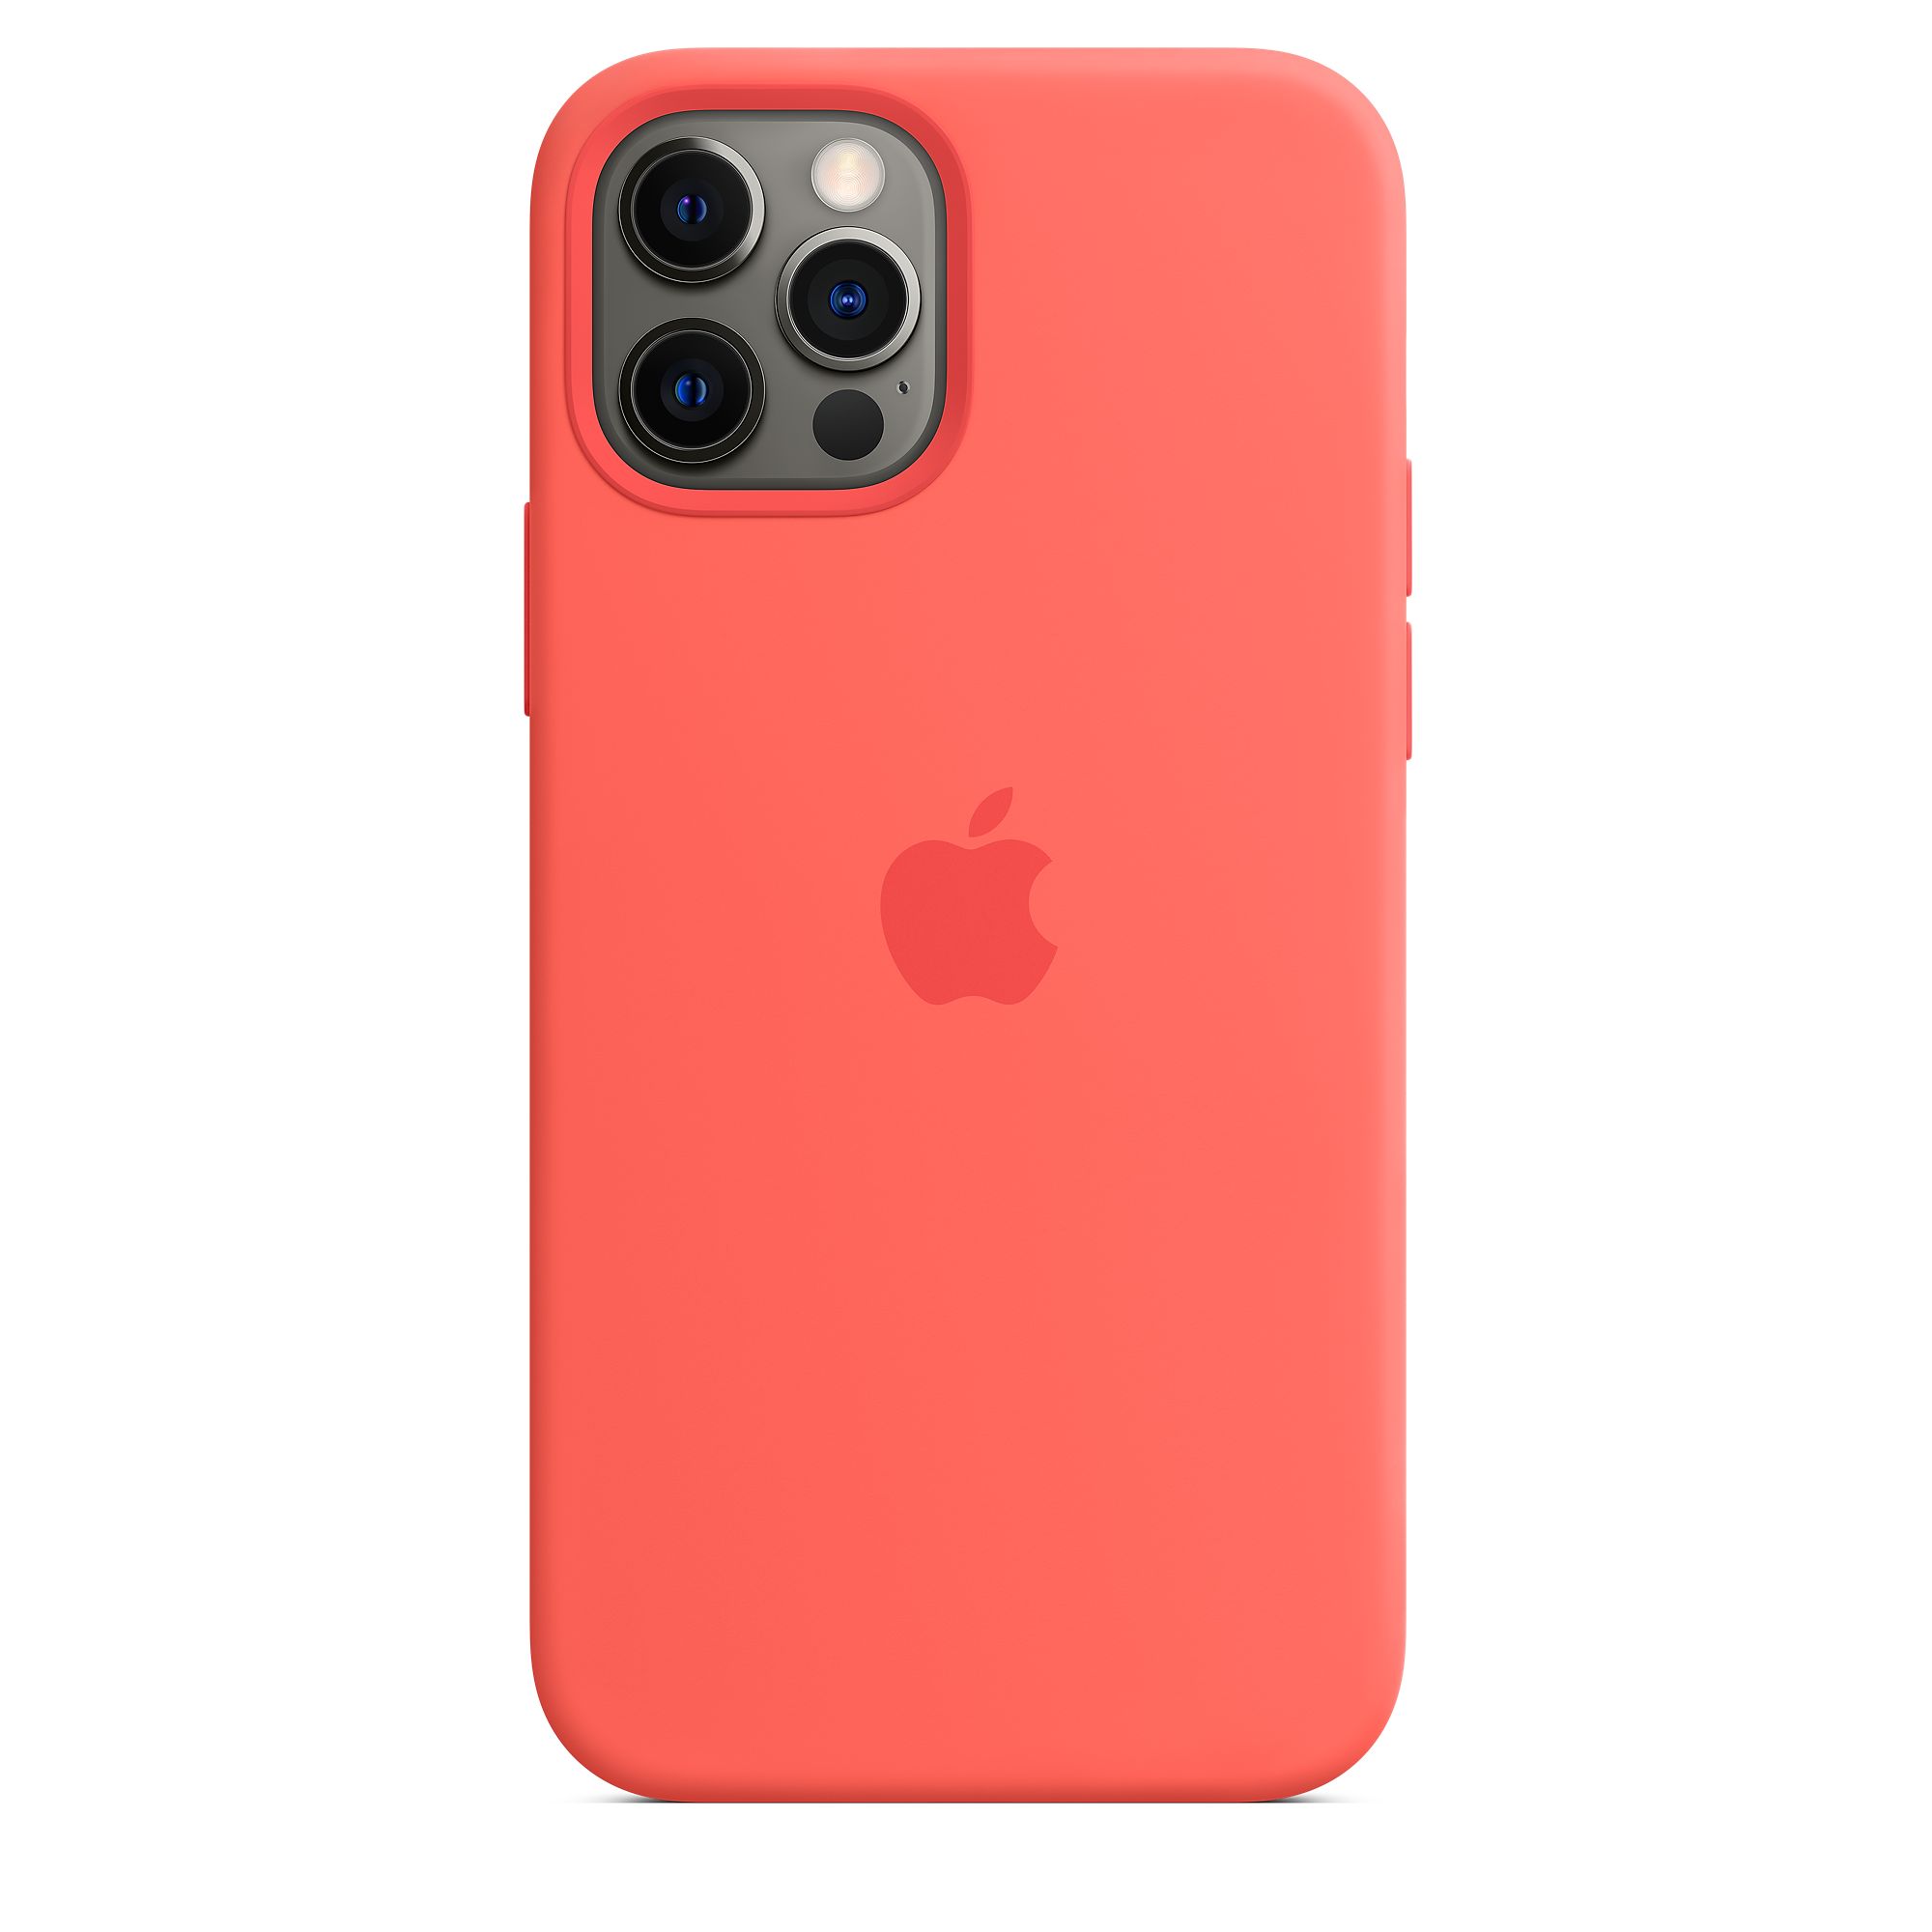 Silicon Case for iPhone 12 Pro Max (Pink Citrus)